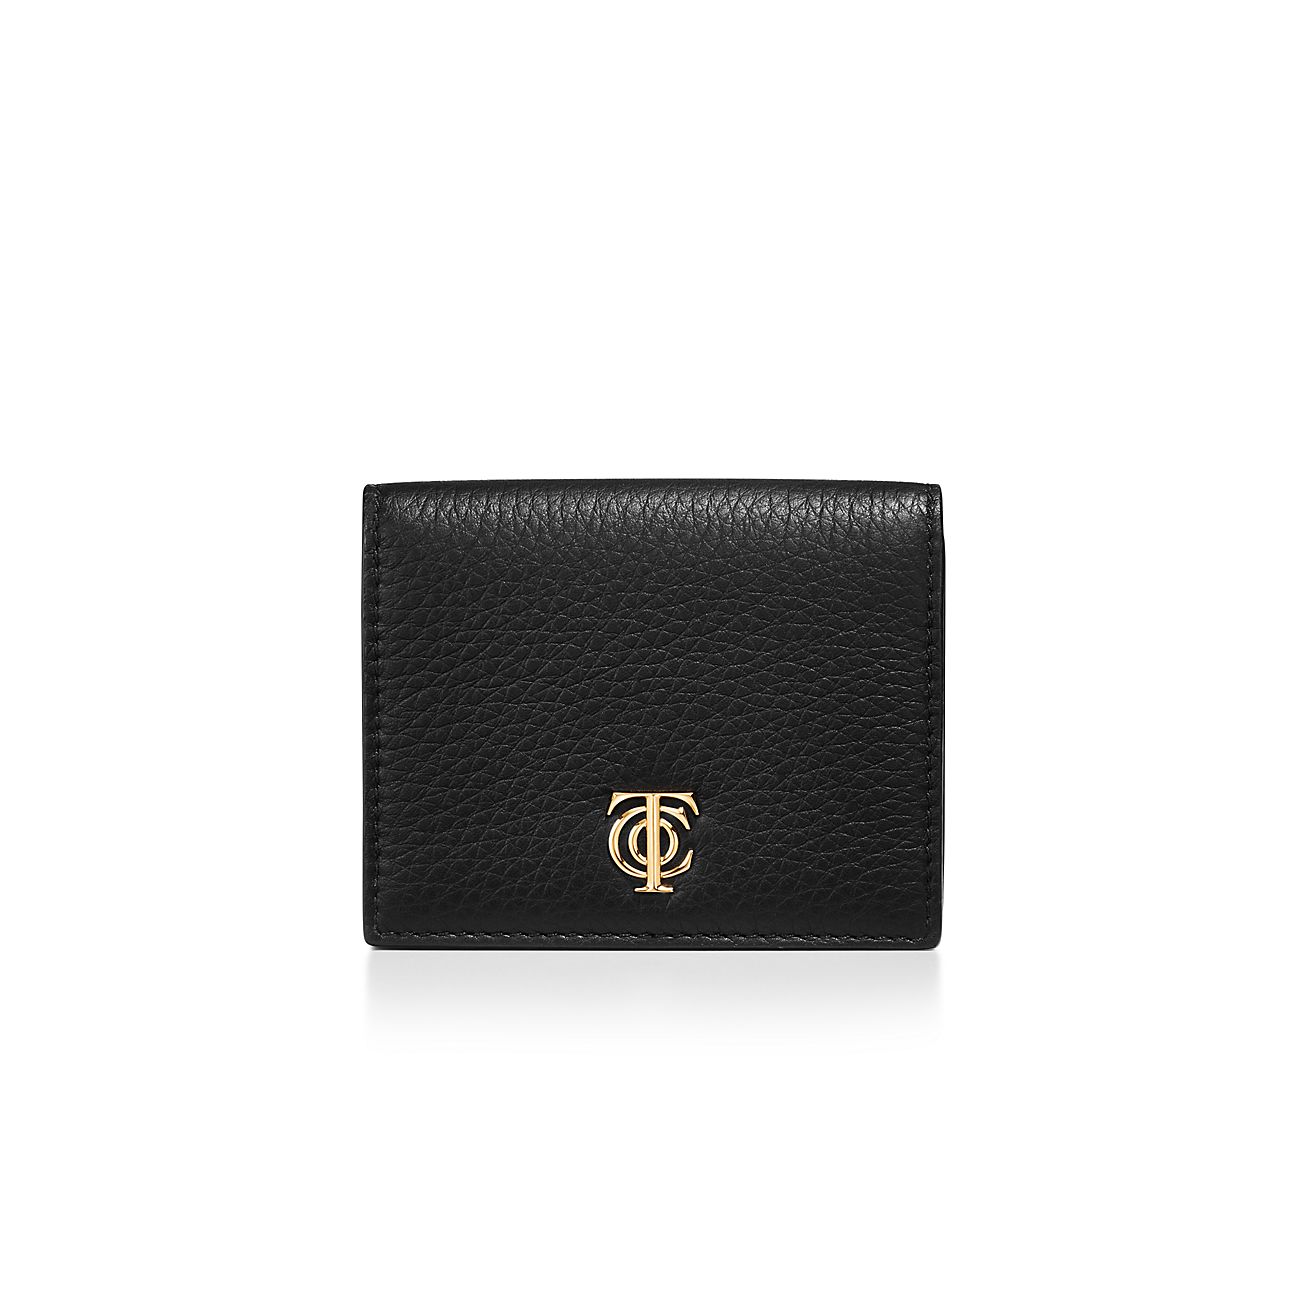 Picasso and Co Embossed Leather Card Holder Black, Brown, Tan